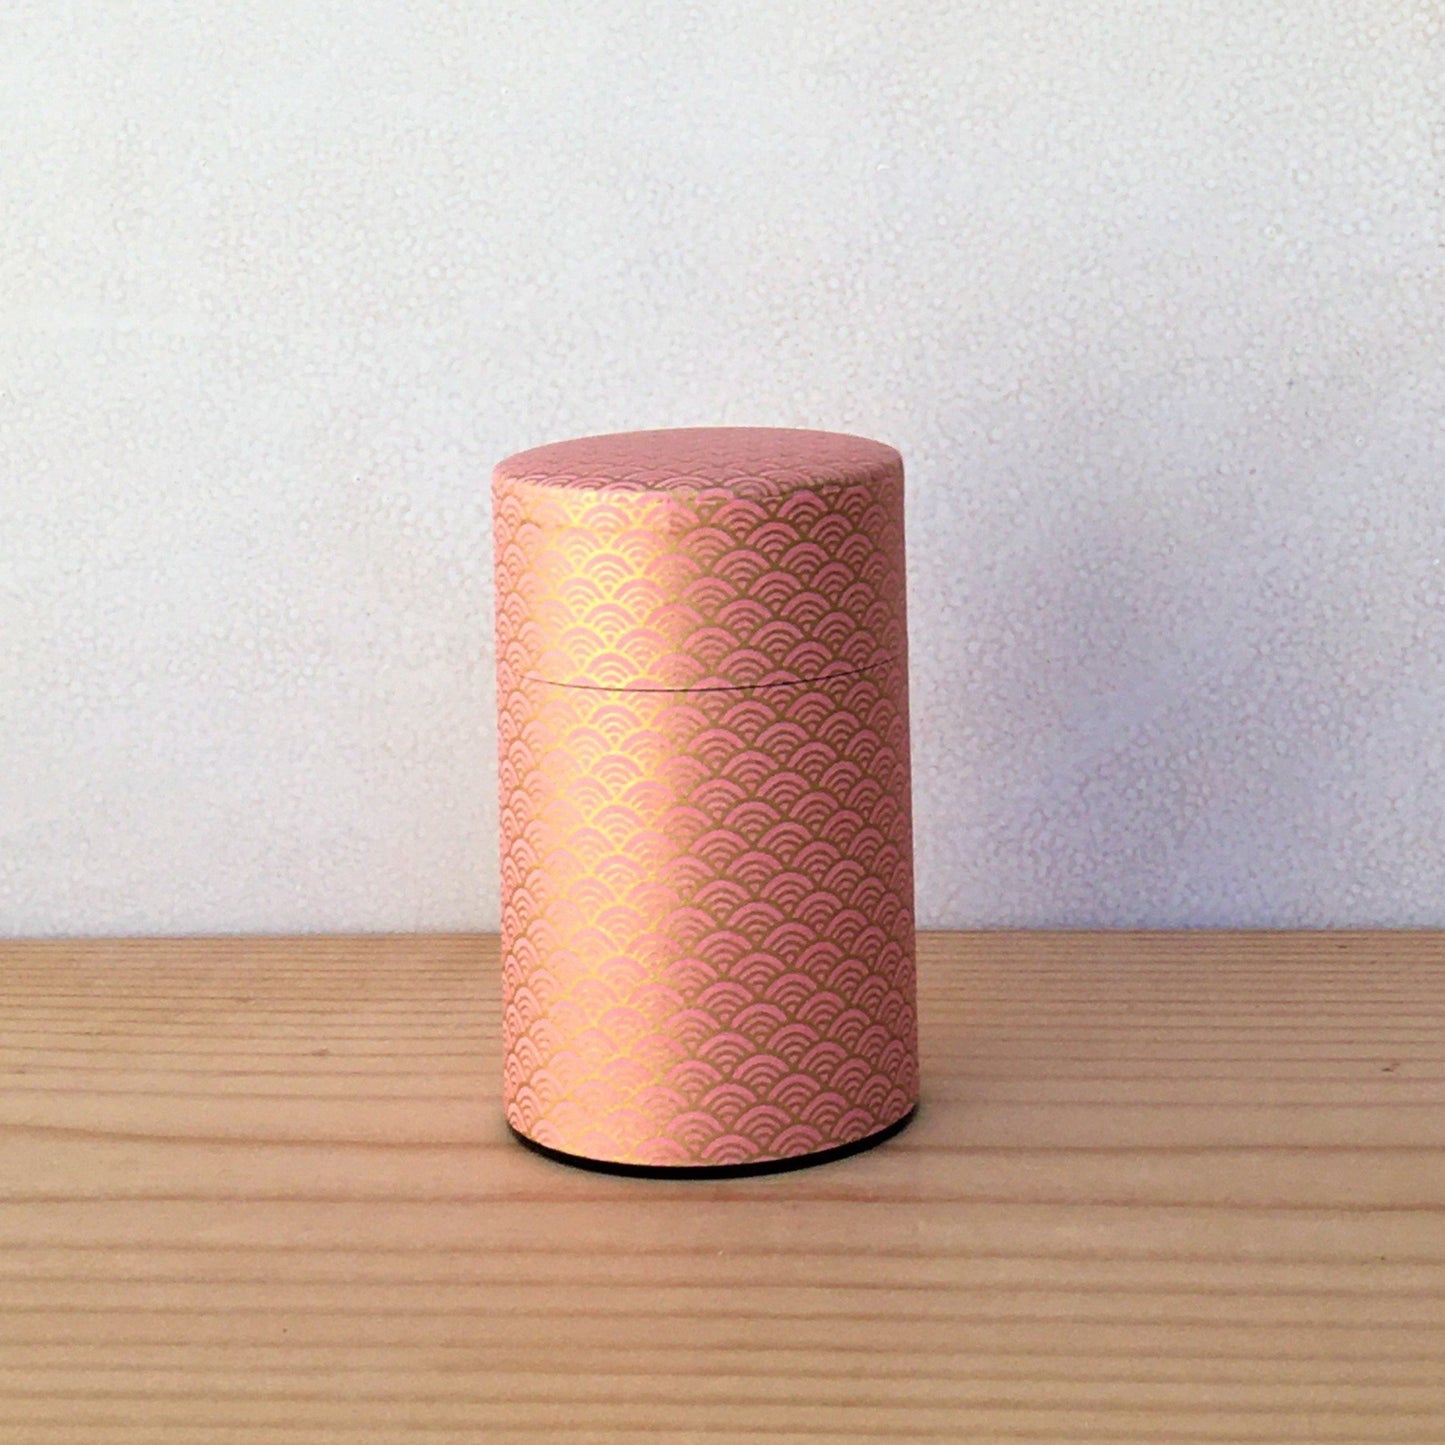 50g Pink & Gold, Washi Paper Canister